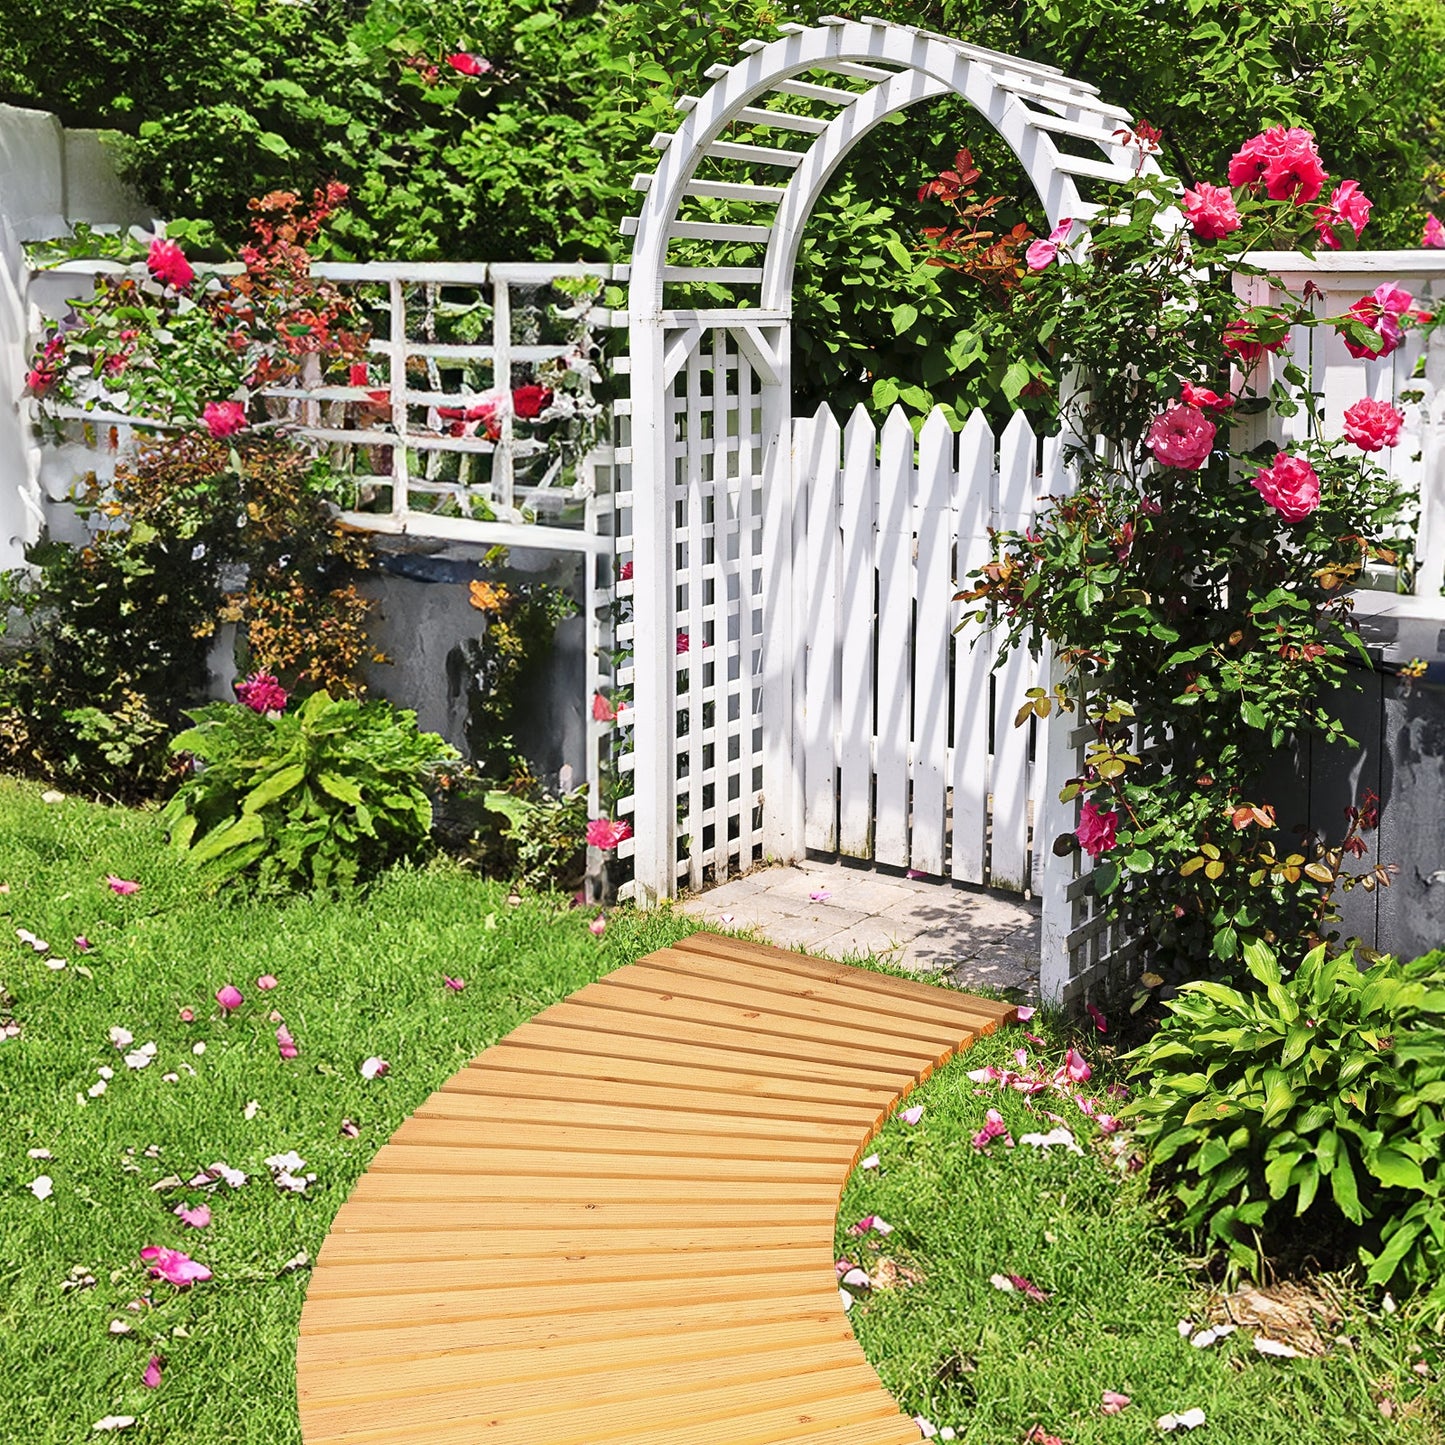 7 FT Wooden Garden Pathway Roll Out Curved Fir Wood Walkway with Anti-slip Surface-Natural